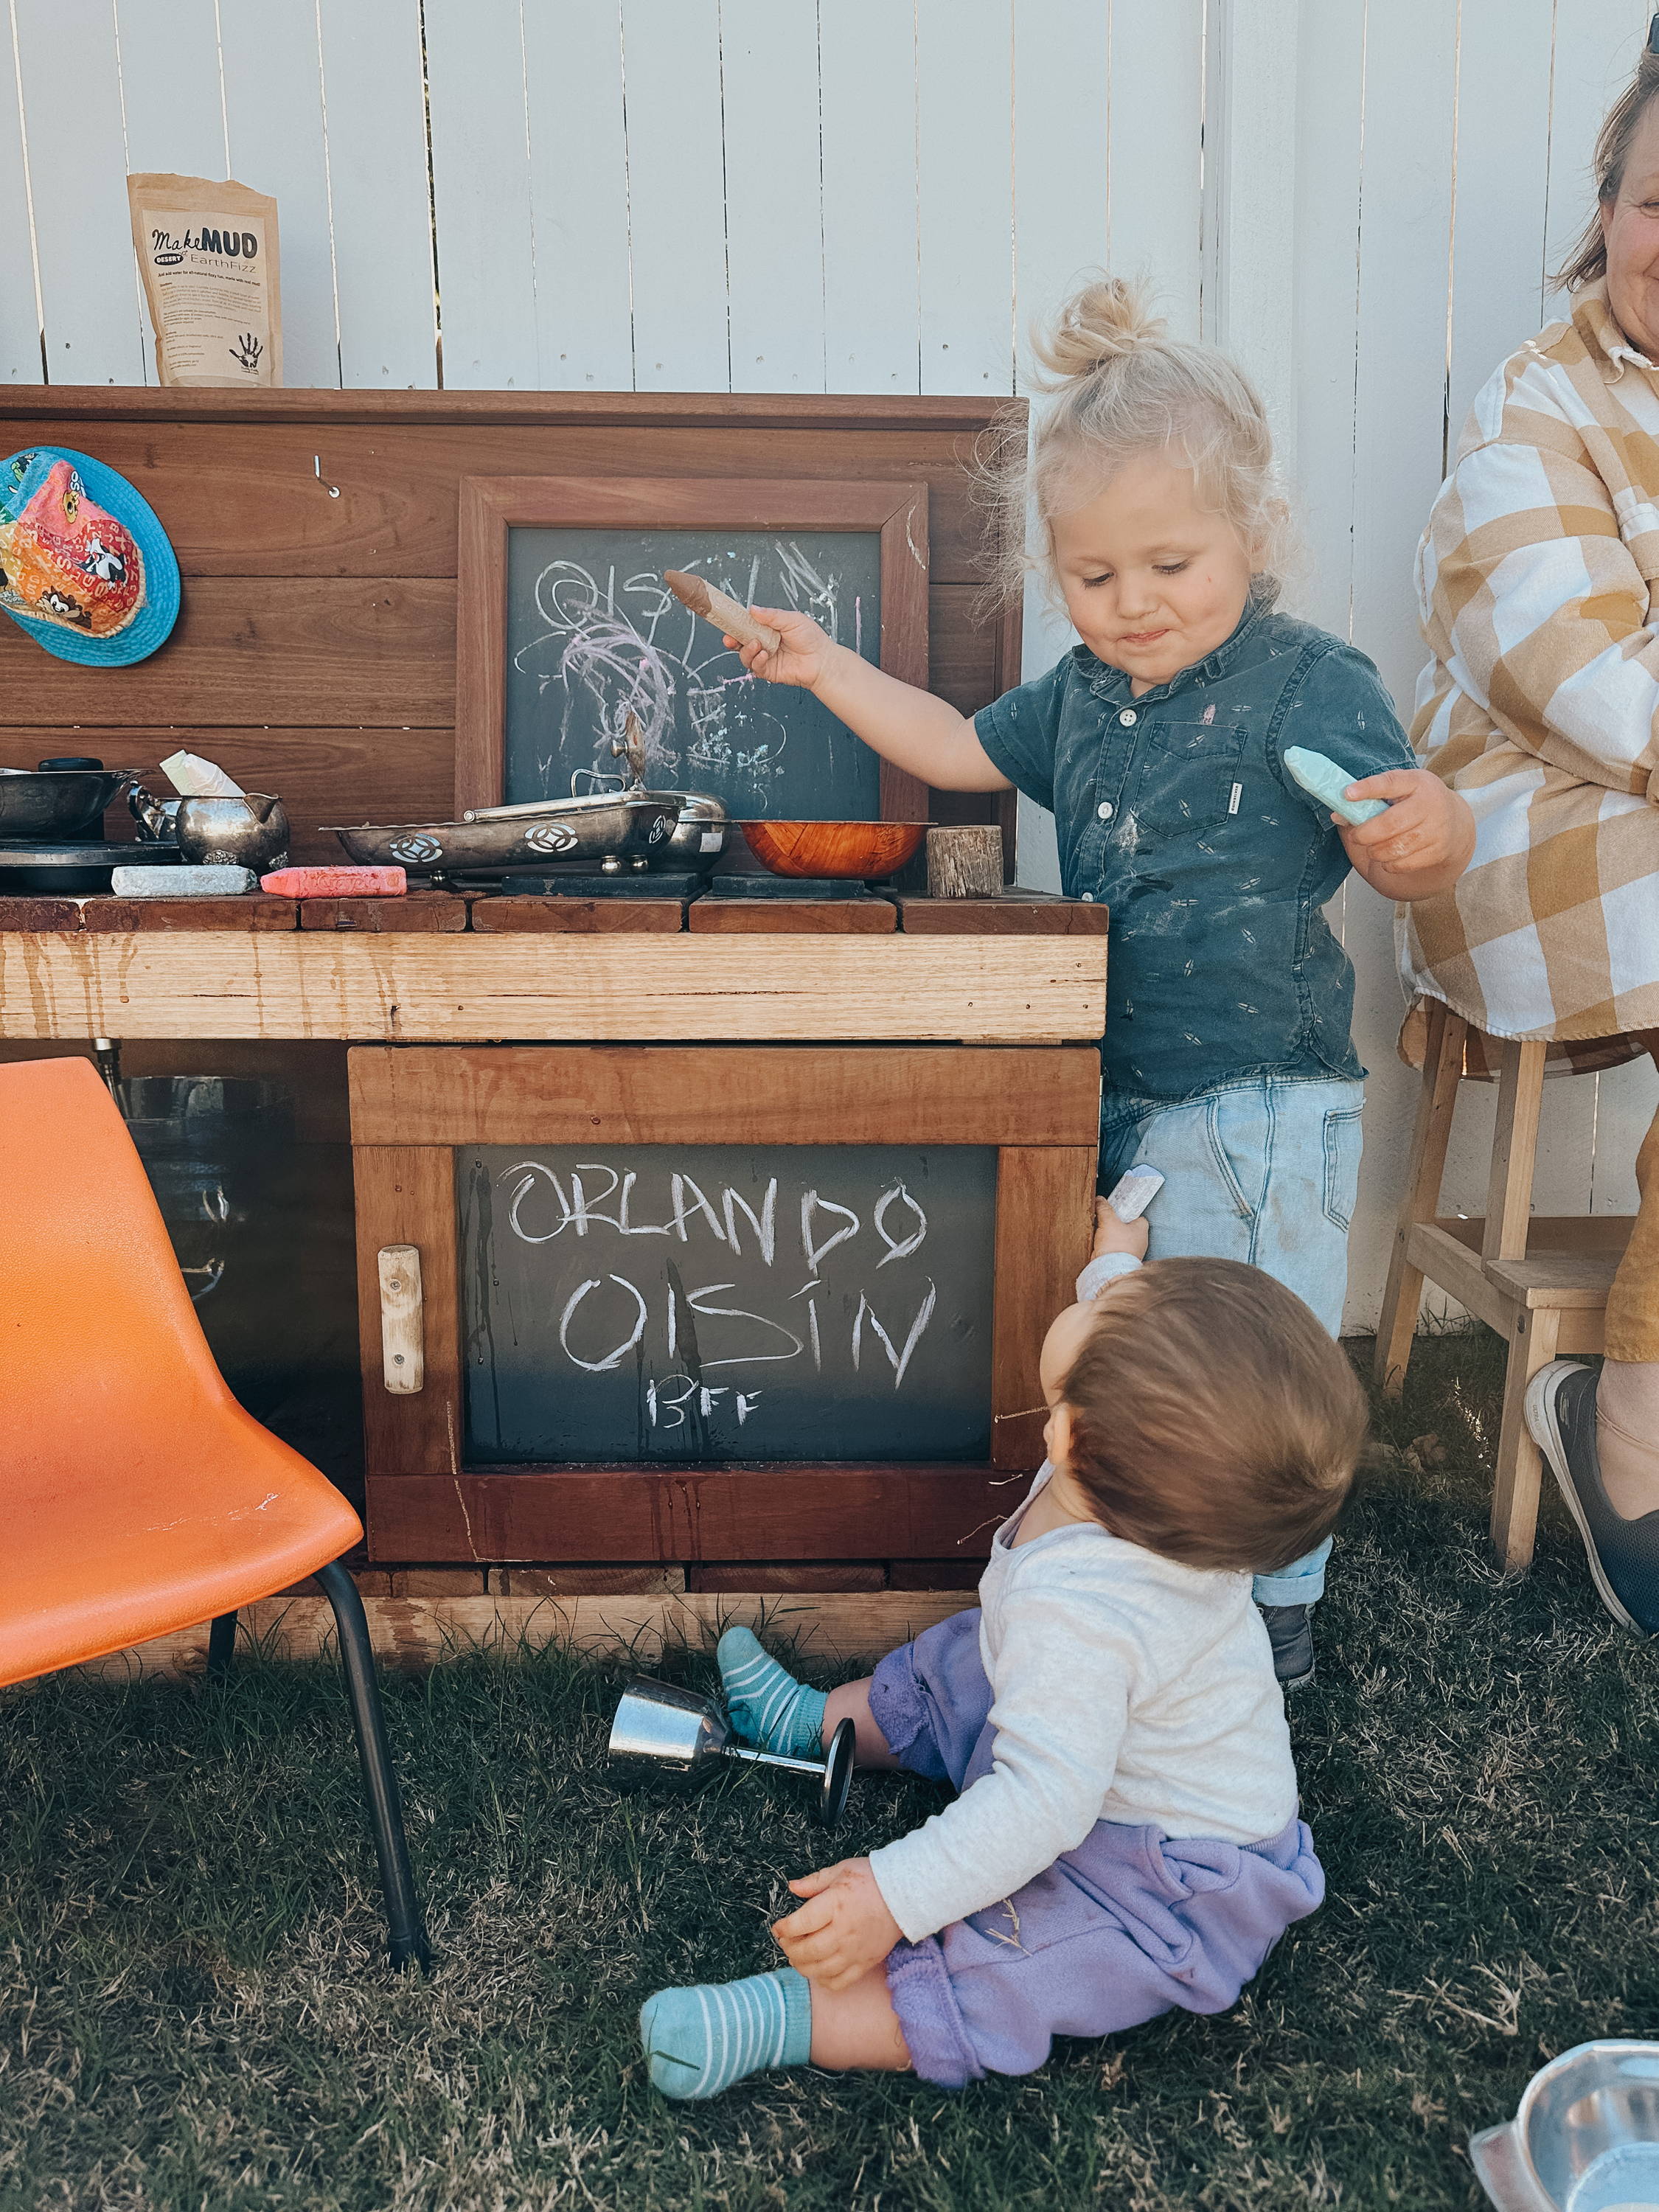 Children drawing with a chalk on a blackboard of a mudkitchen